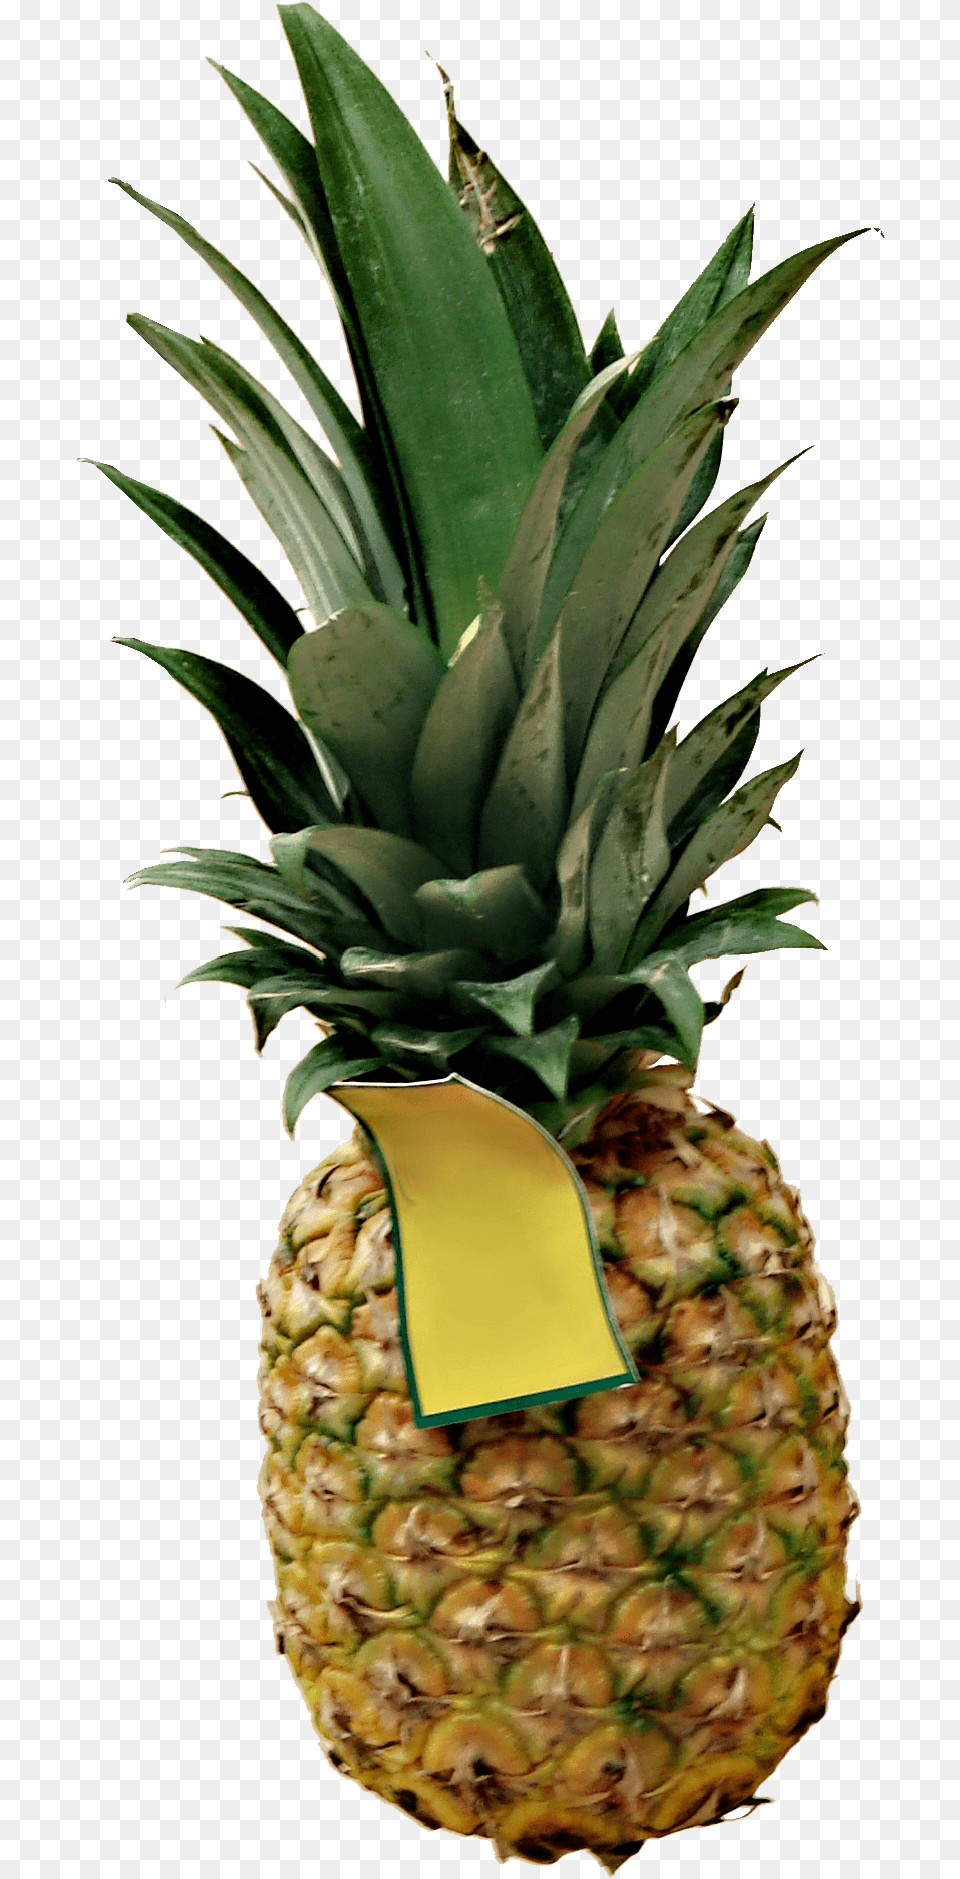 Hd High Definition Pineapple Picture Ananas, Food, Fruit, Plant, Produce Free Png Download